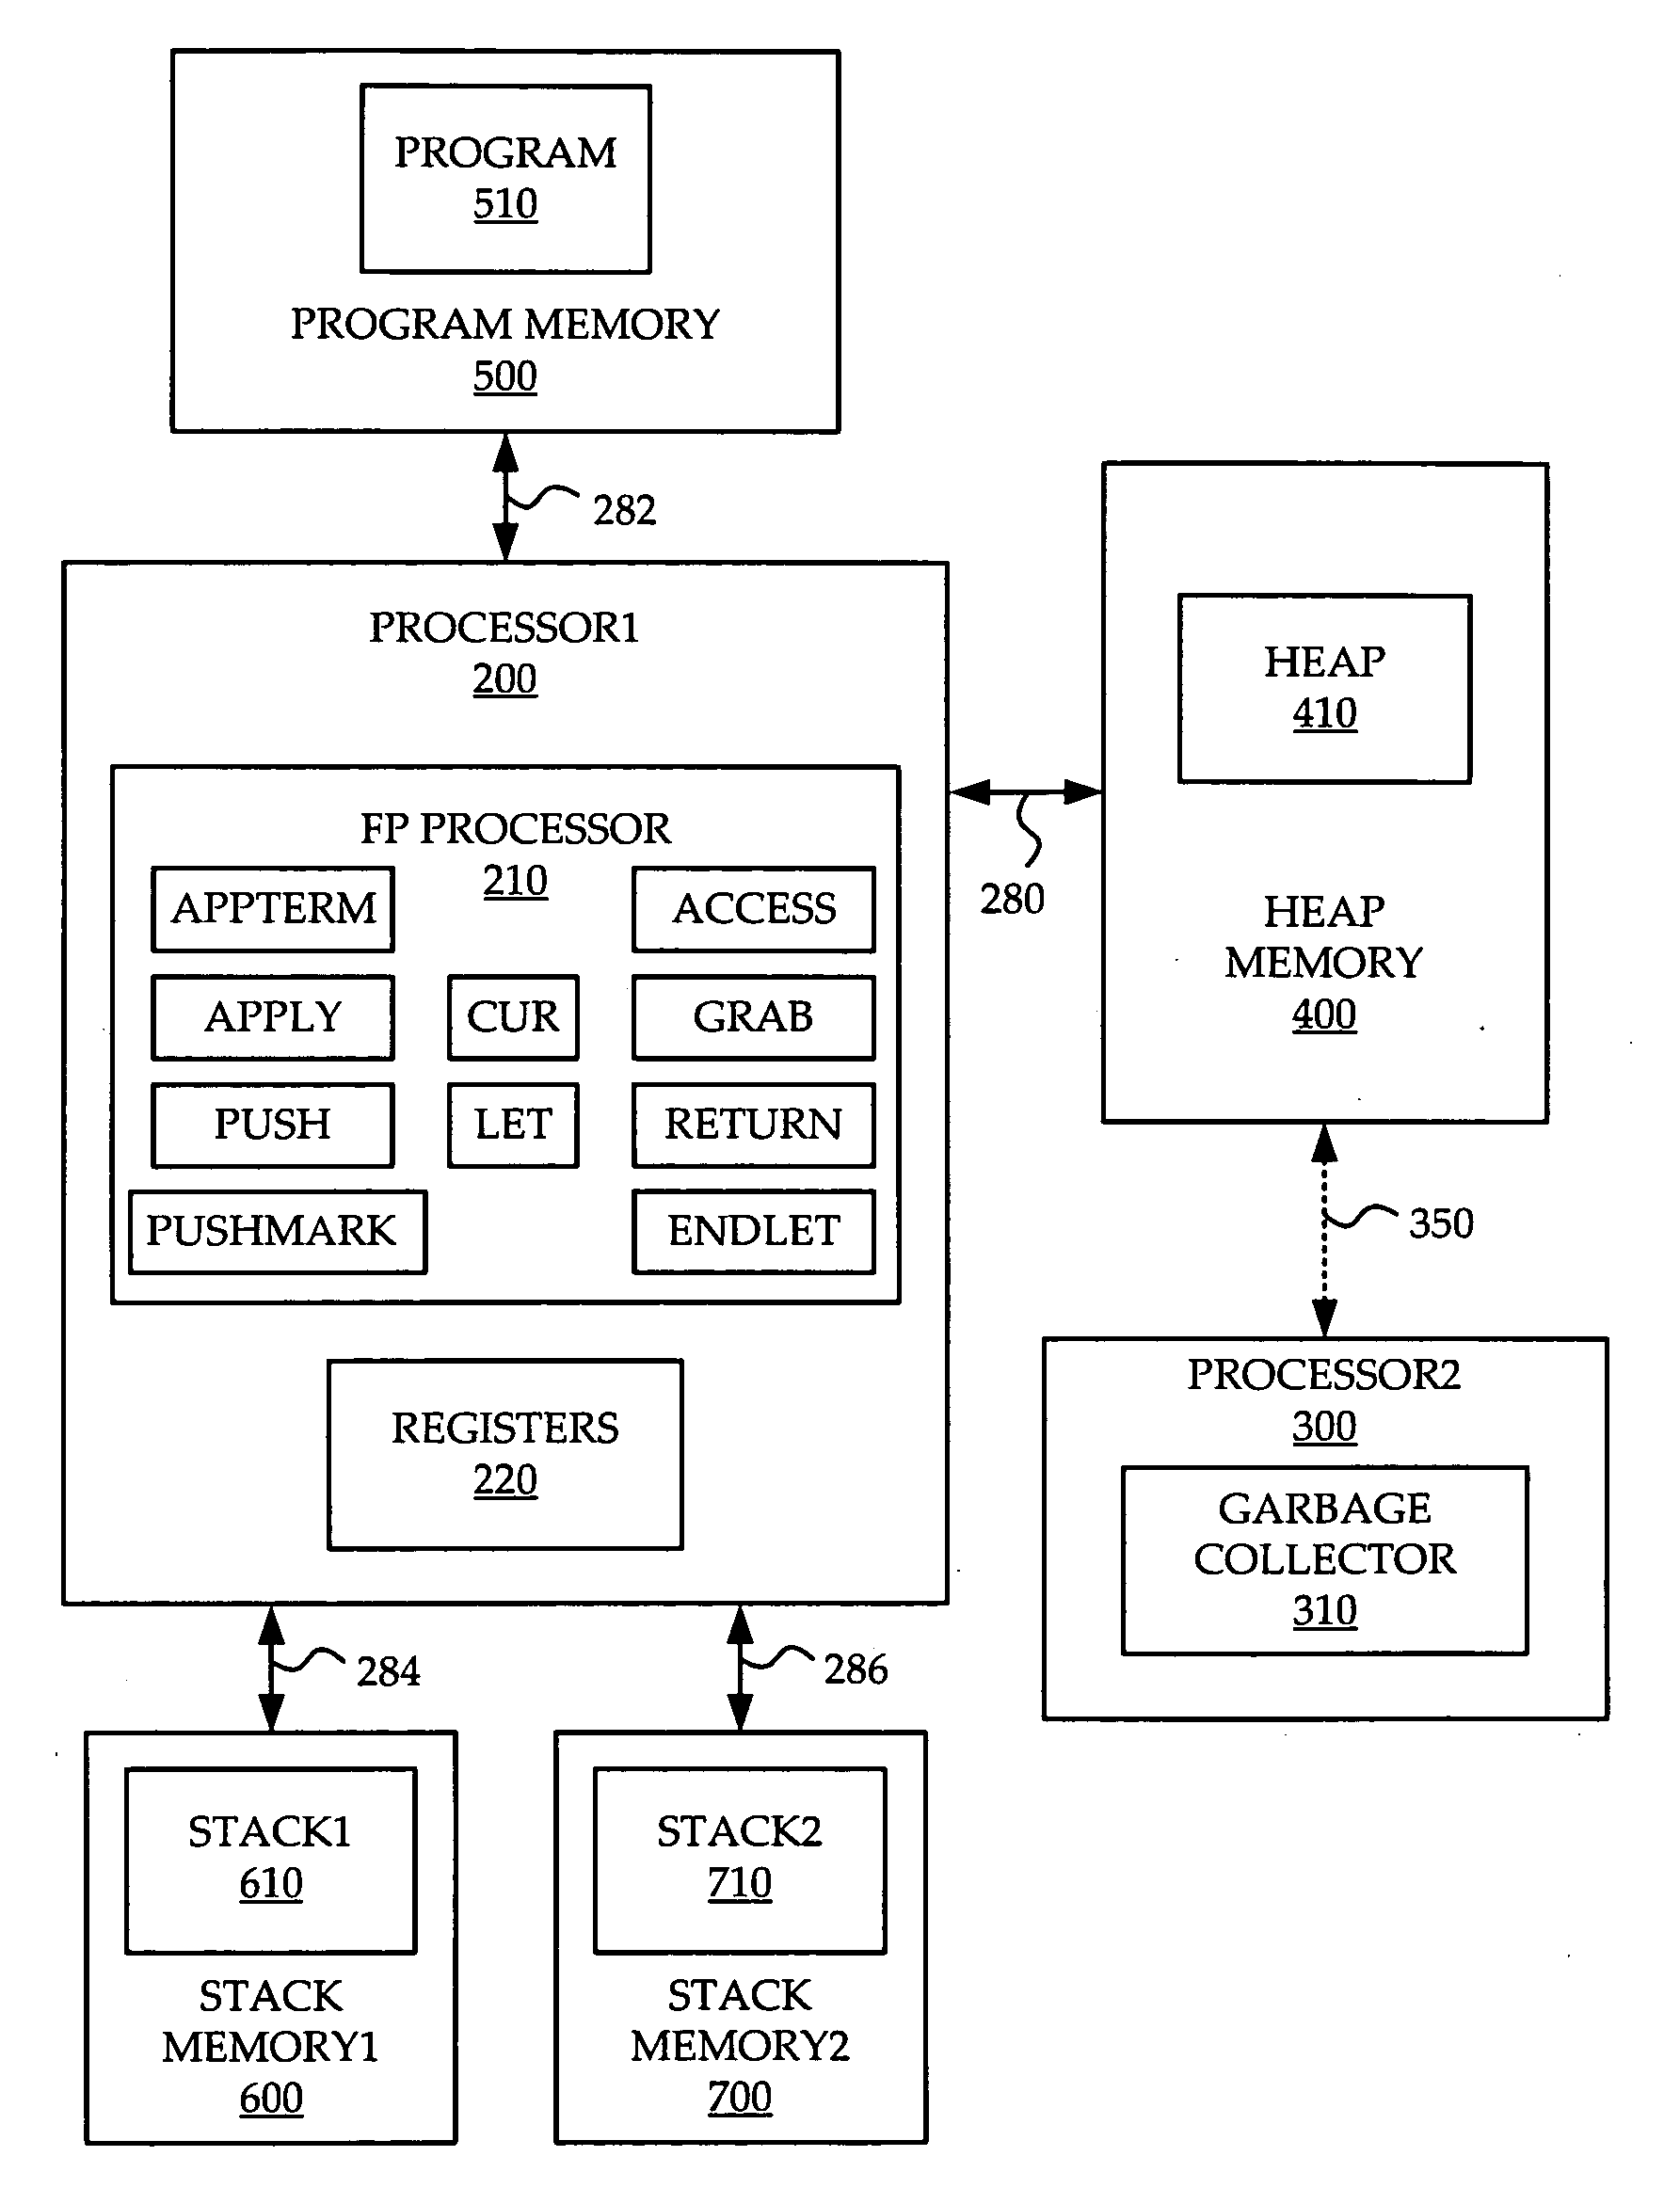 Platform and method for functional programming (FP) processing